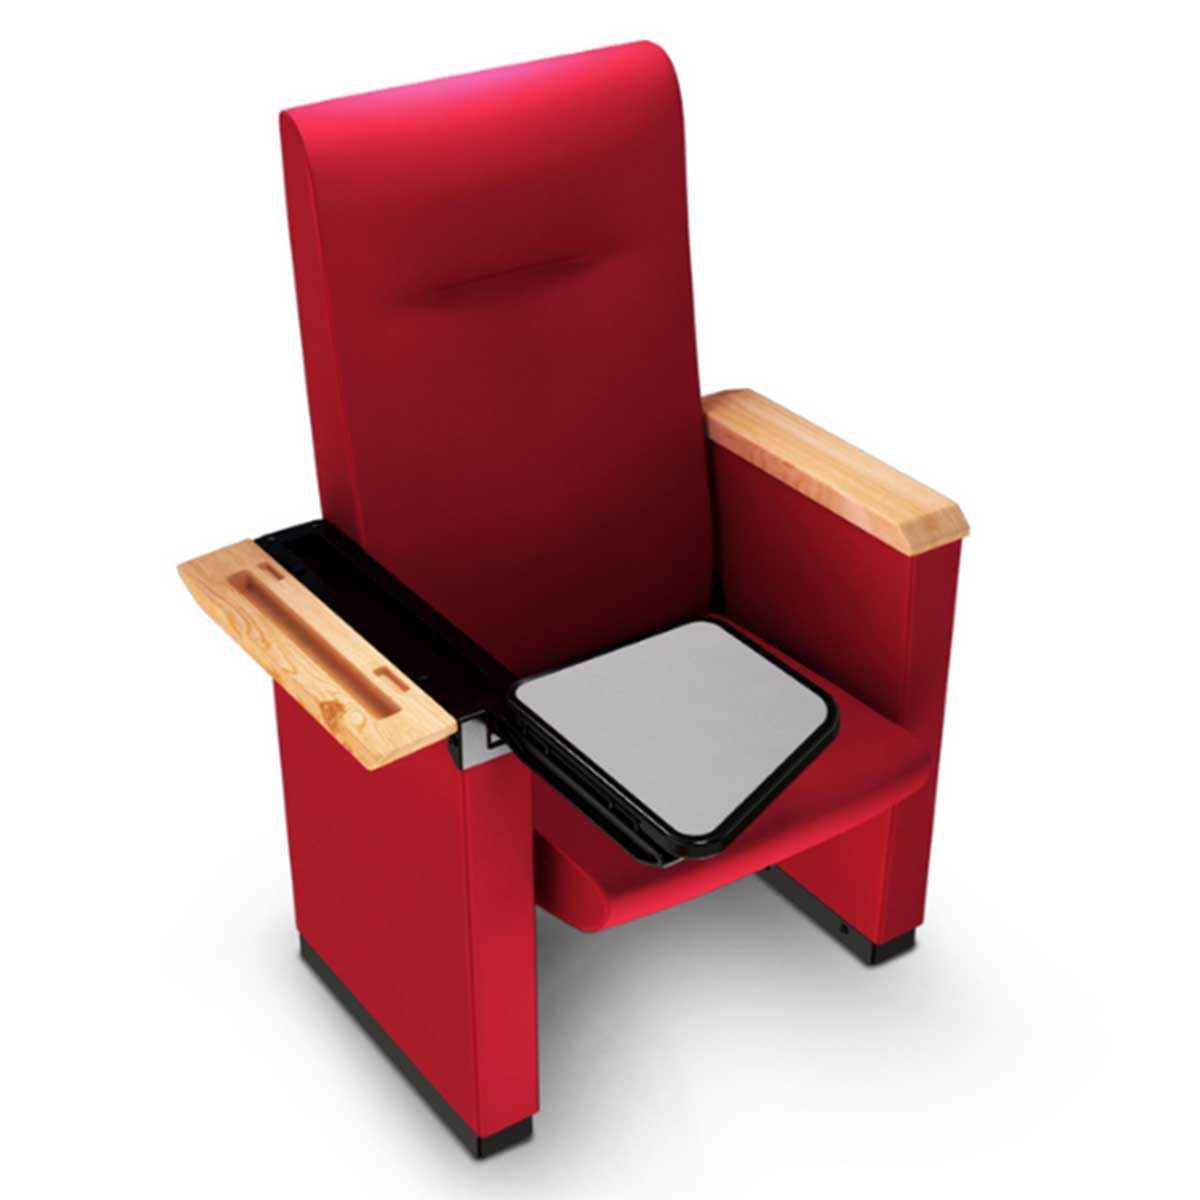 Theater Chair Manufacturers, Suppliers in Rohini Sector 28